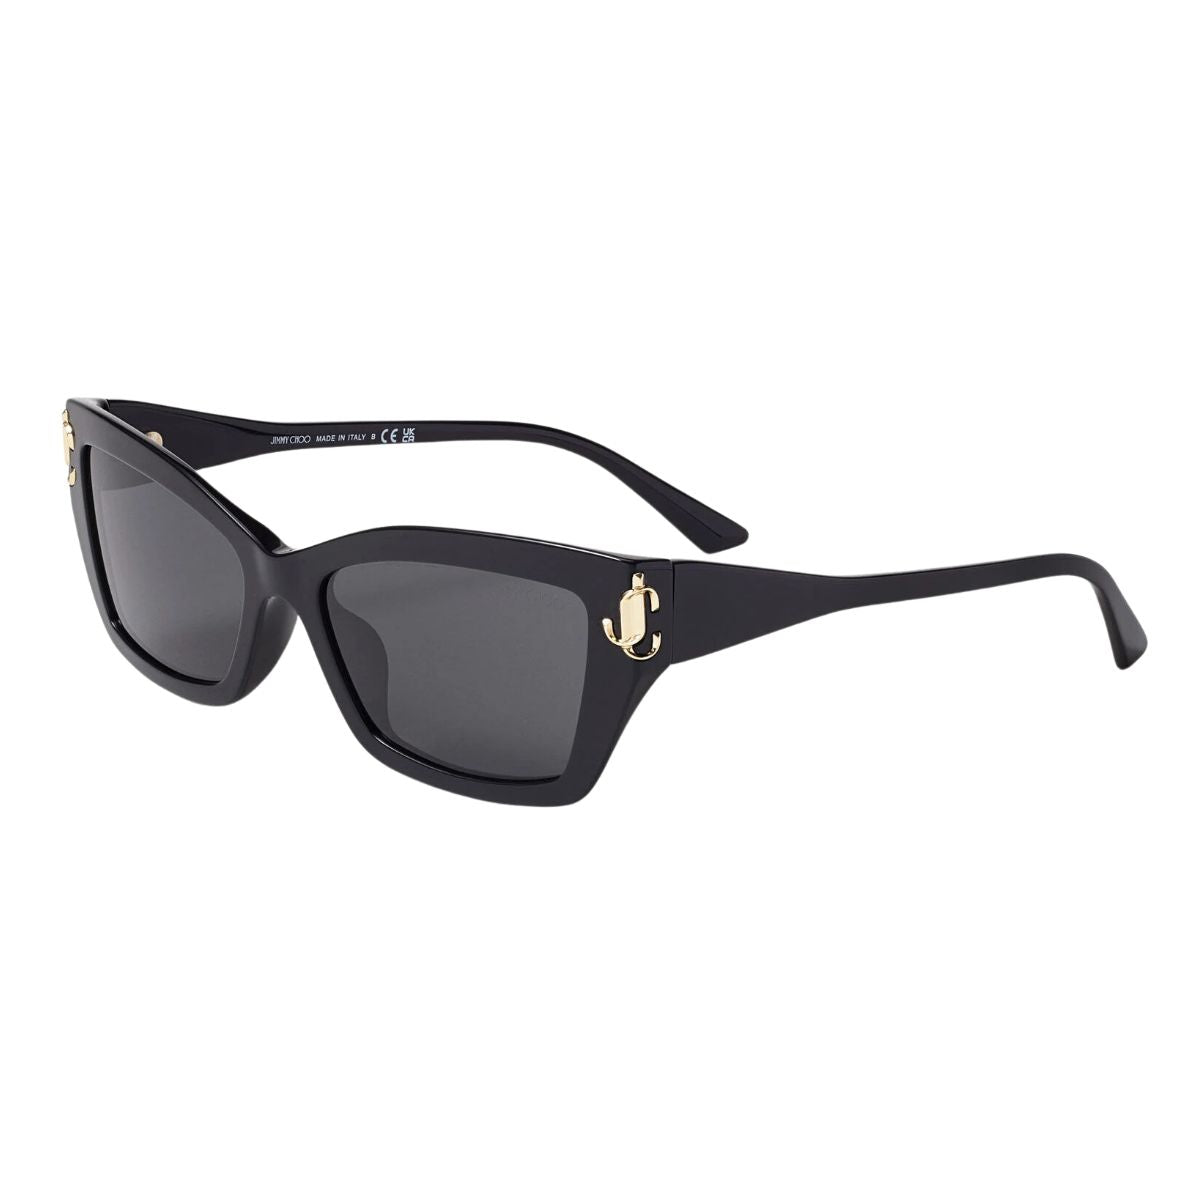 "Buy Stylish Jimmy Choo 5011U Black Color UV Protection Cooling Goggles For Ladies At Online | Offer Women's Goggles At Optorium"